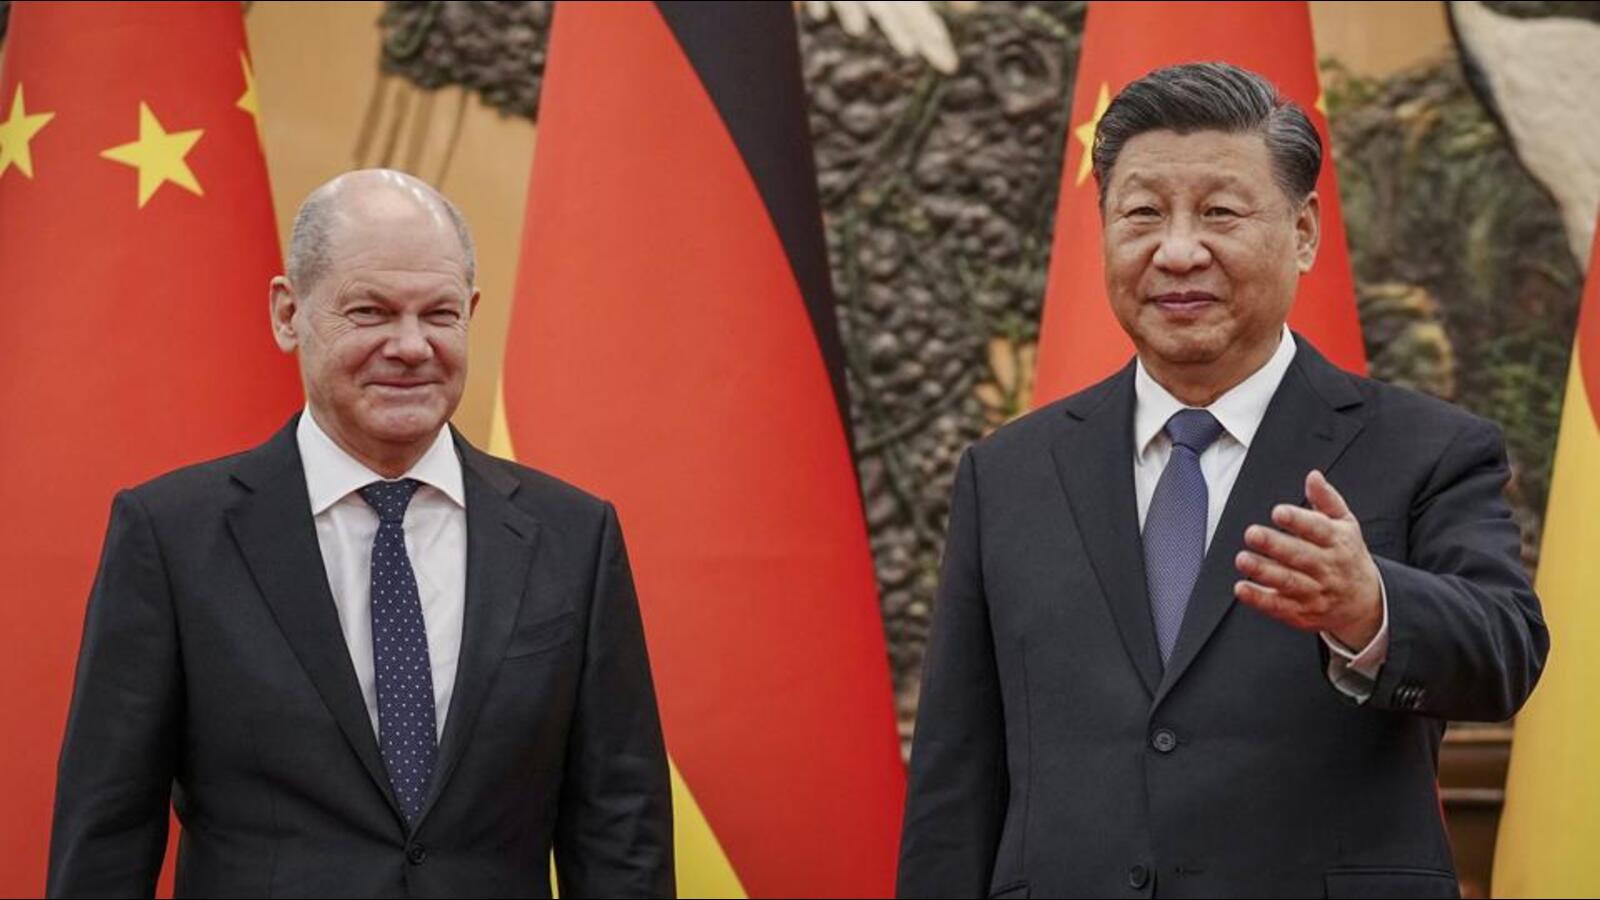 china-opposes-use-of-nuclear-weapons-in-europe-xi-tells-scholz-in-message-to-putin